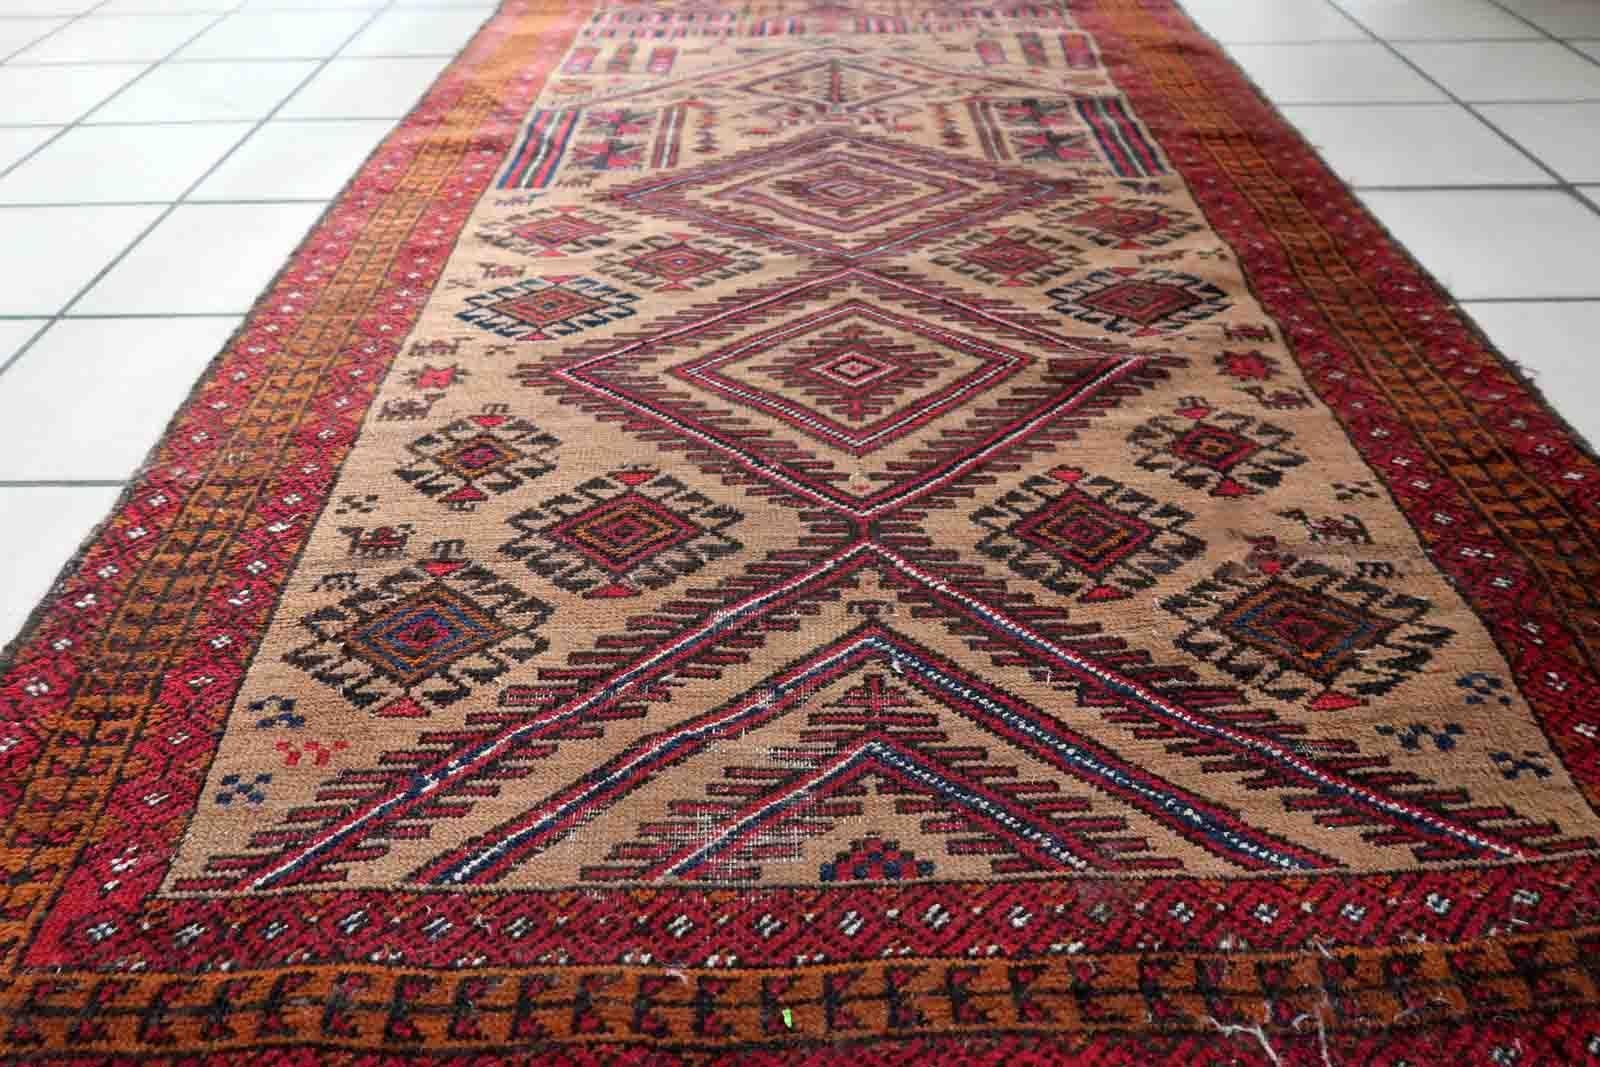 Handmade antique Afghan Baluch rug in tribal prayer design. The rug is from the beginning of 20th century in original condition, it has some low pile.

-condition: original, some low pile,

-circa: 1920s,

-size: 2.8' x 4.5' (86cm x